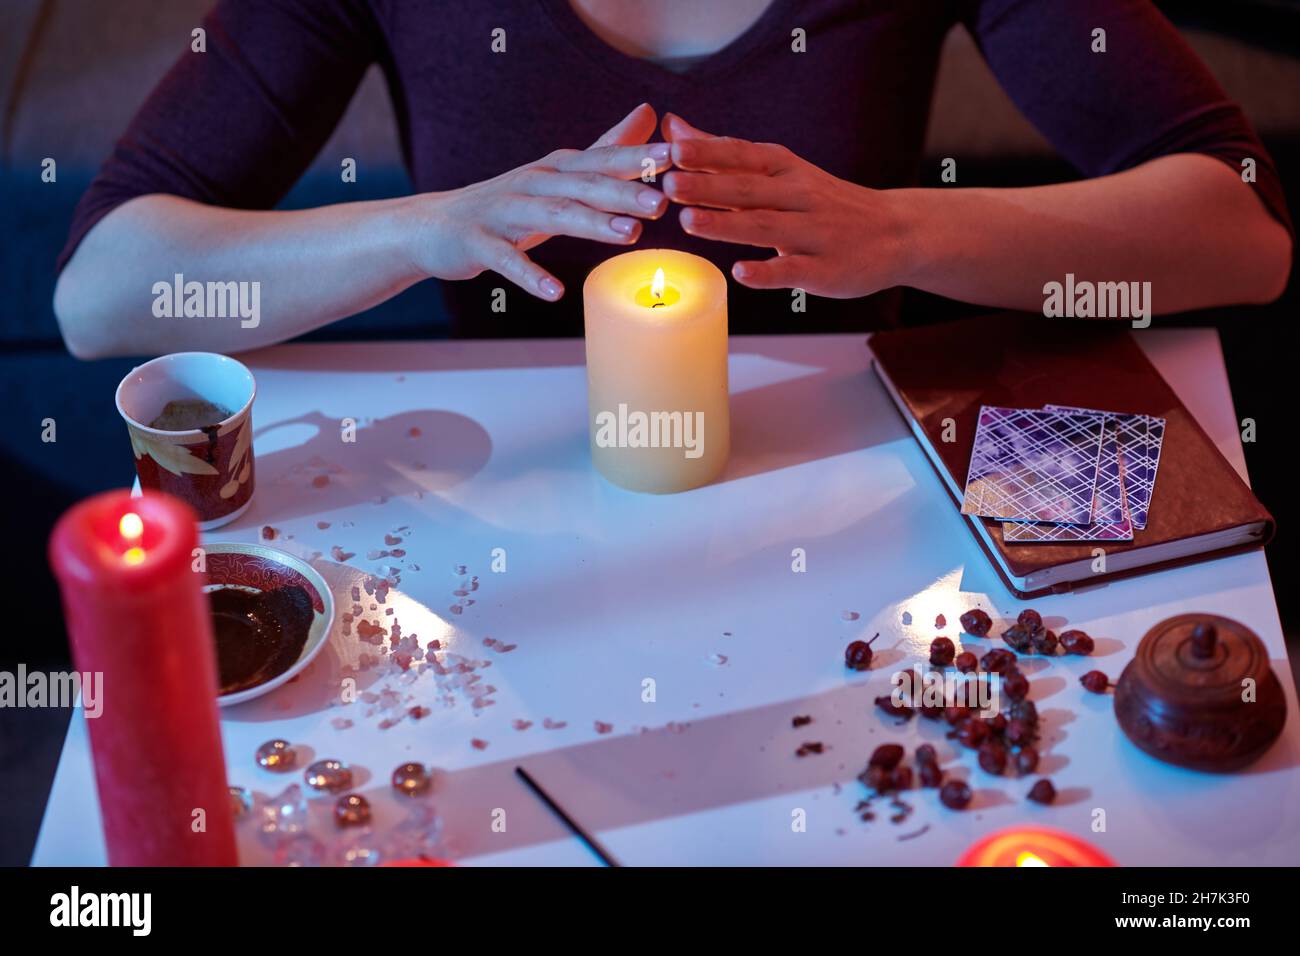 Mysterious woman practicing magic using candlelight Stock Photo